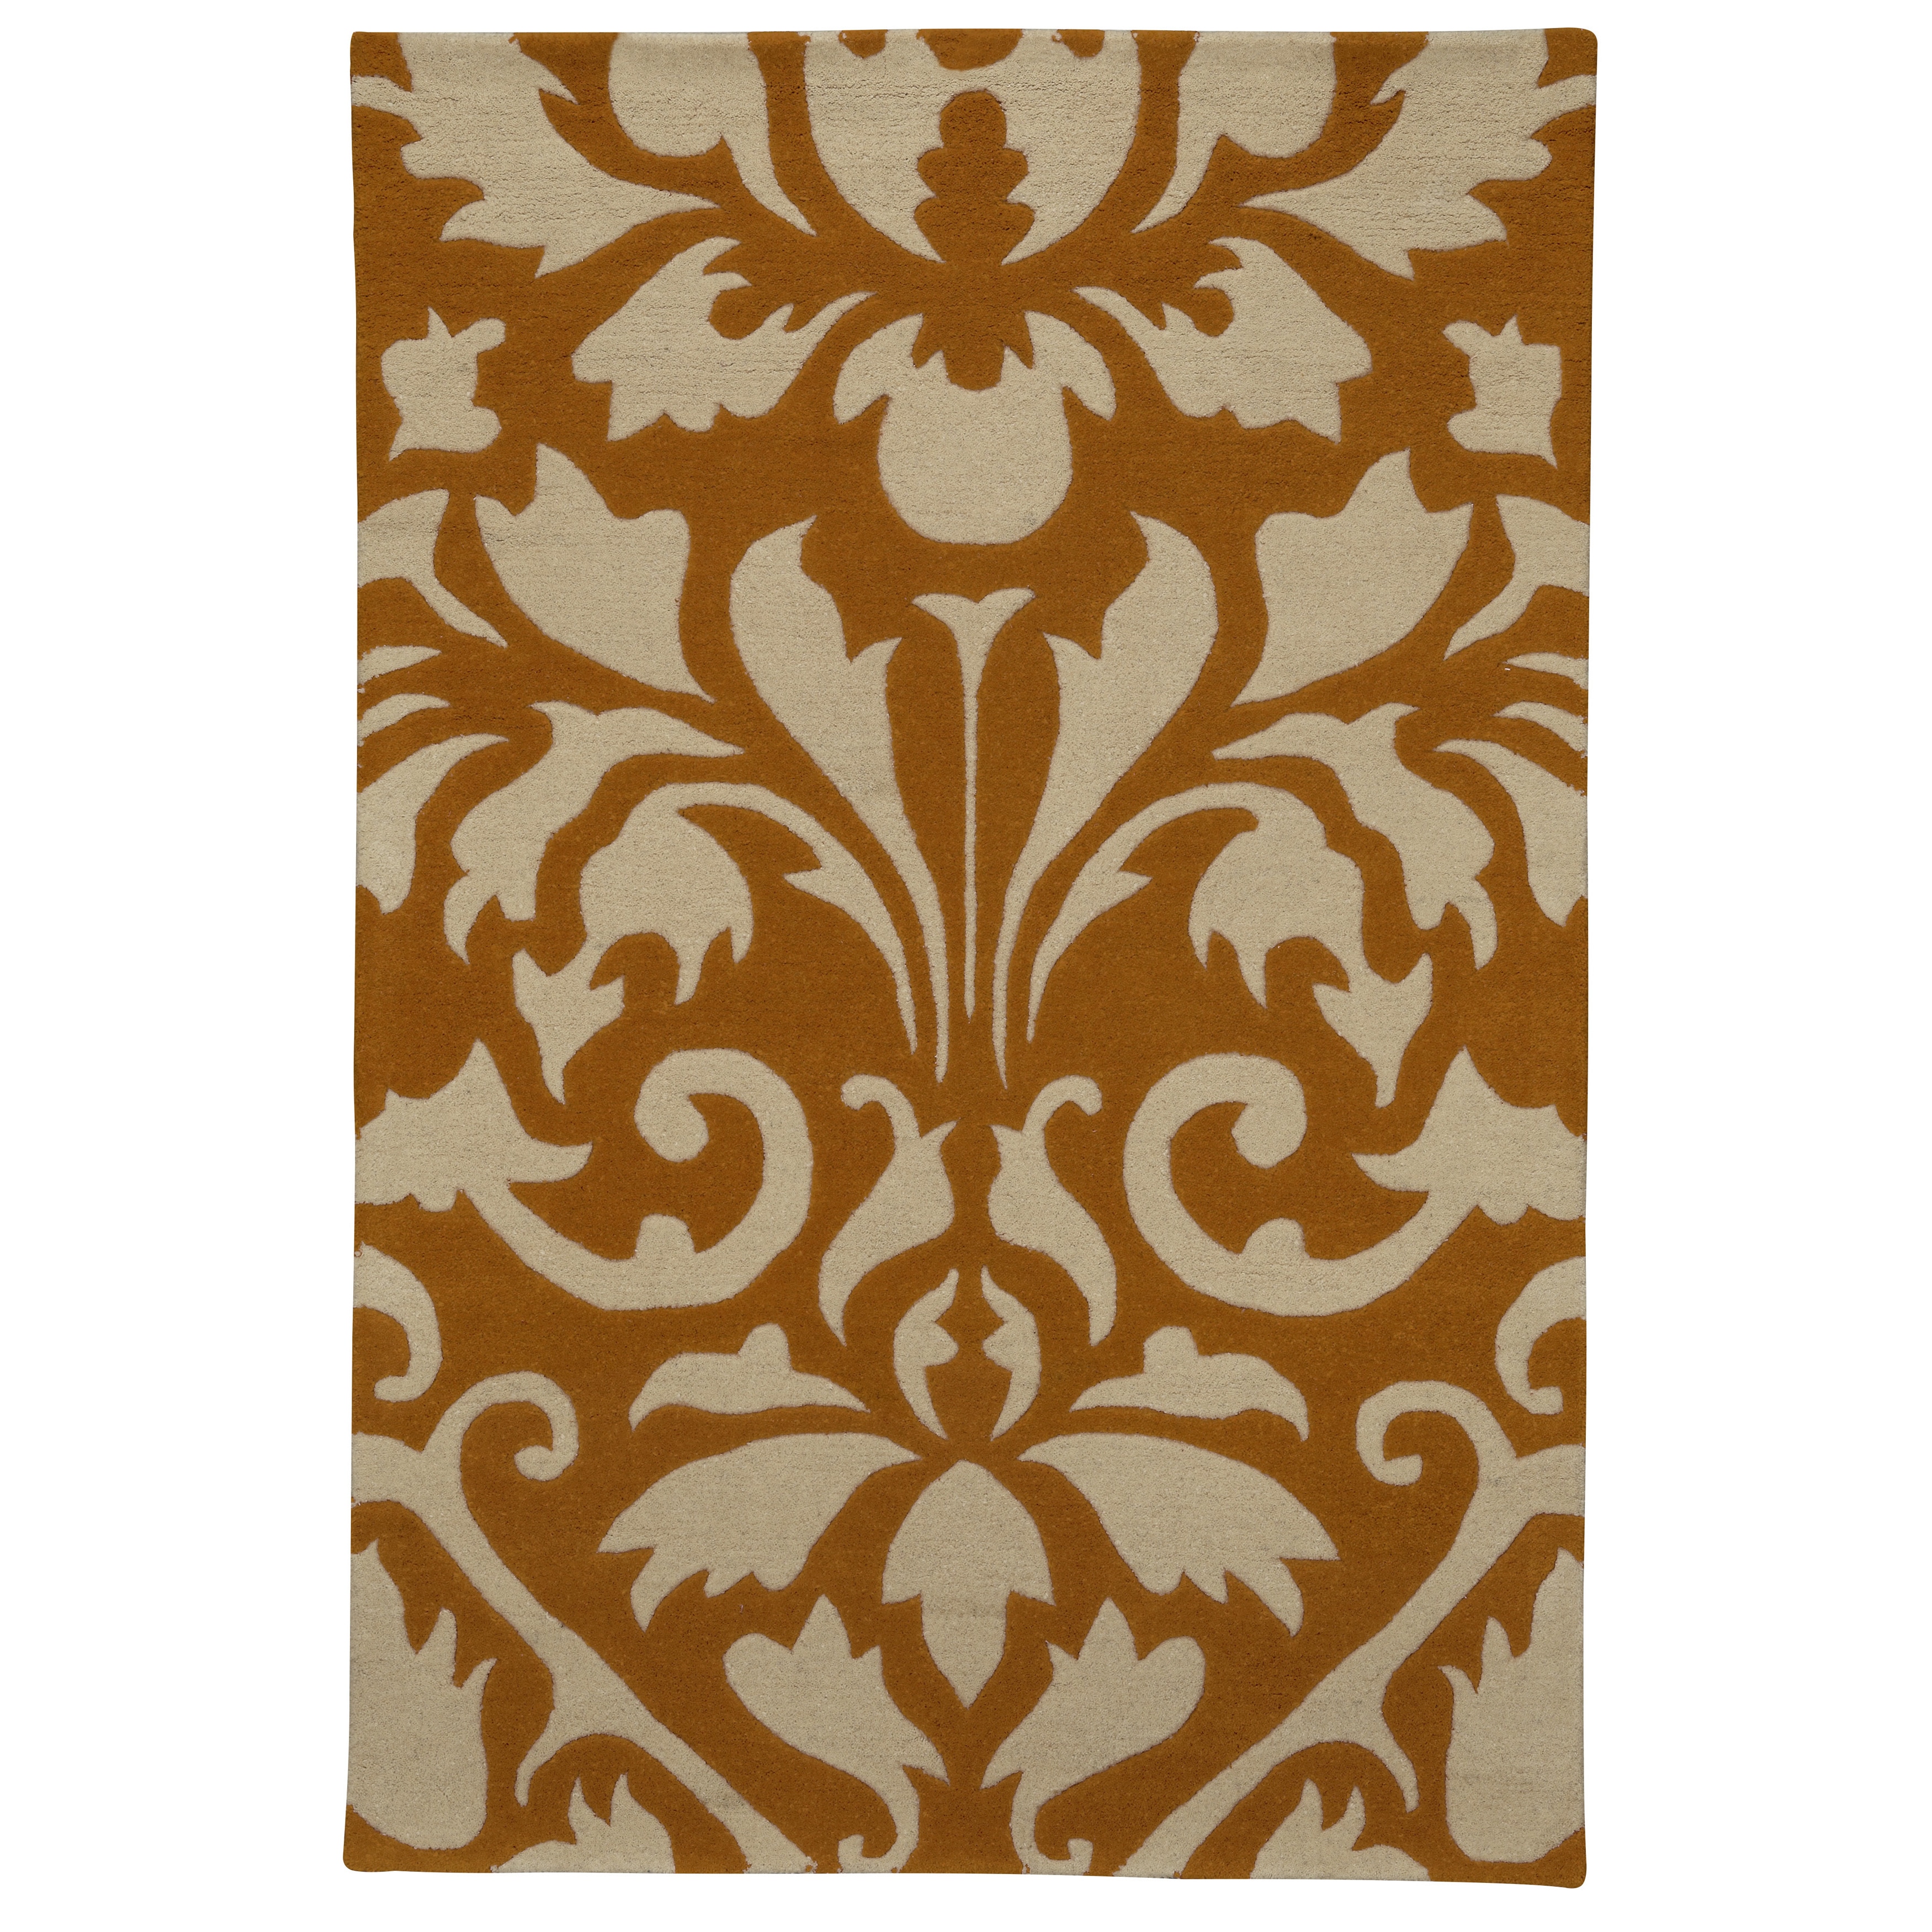 Sands Modern Highlights Two tone Damask Area Rug (5 X 8)